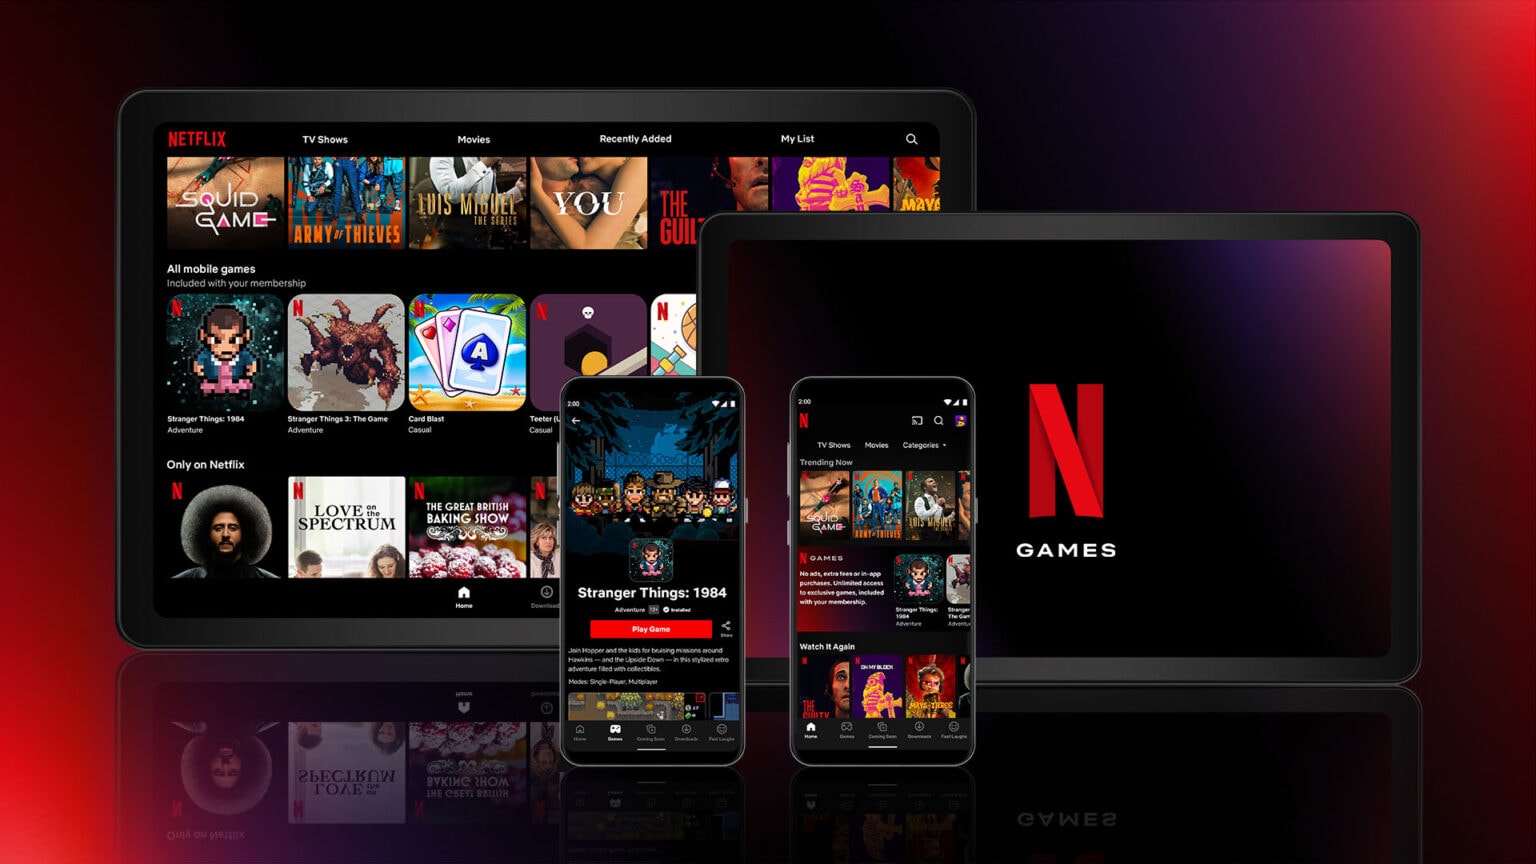 Netflix Games goes live on iPhone and iPad